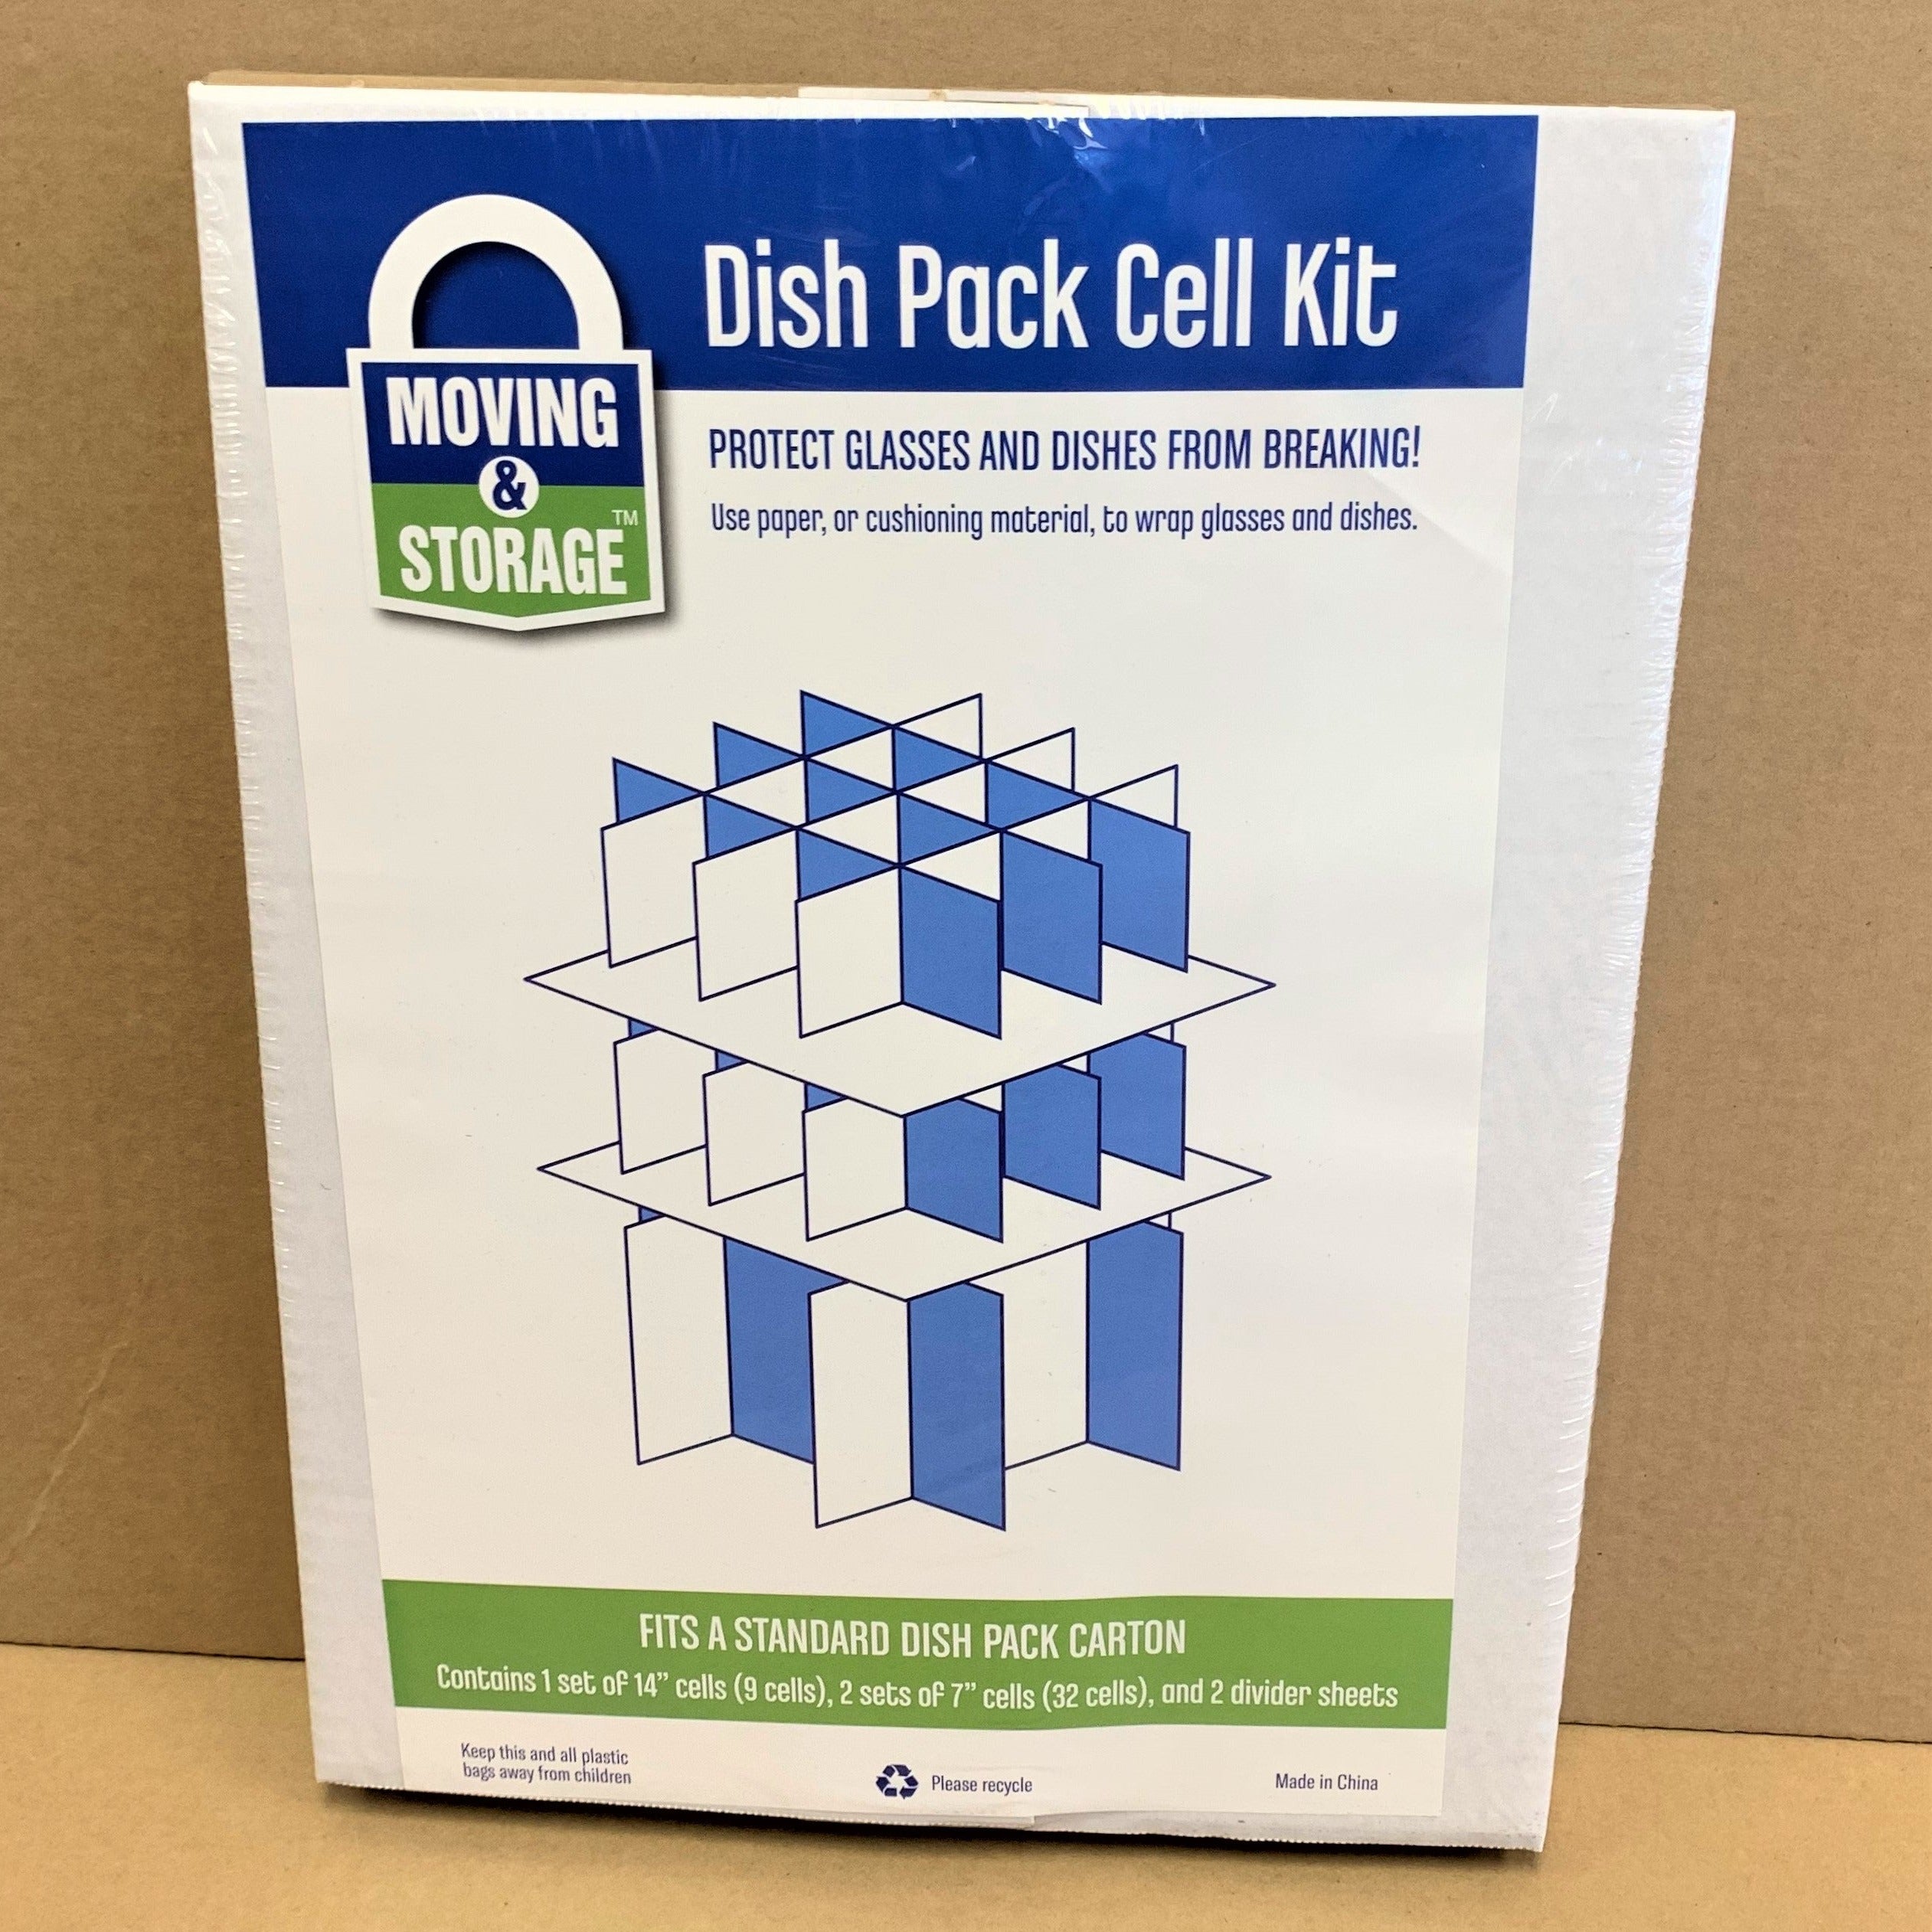 Dish Pack Kit for Glass and Dishes